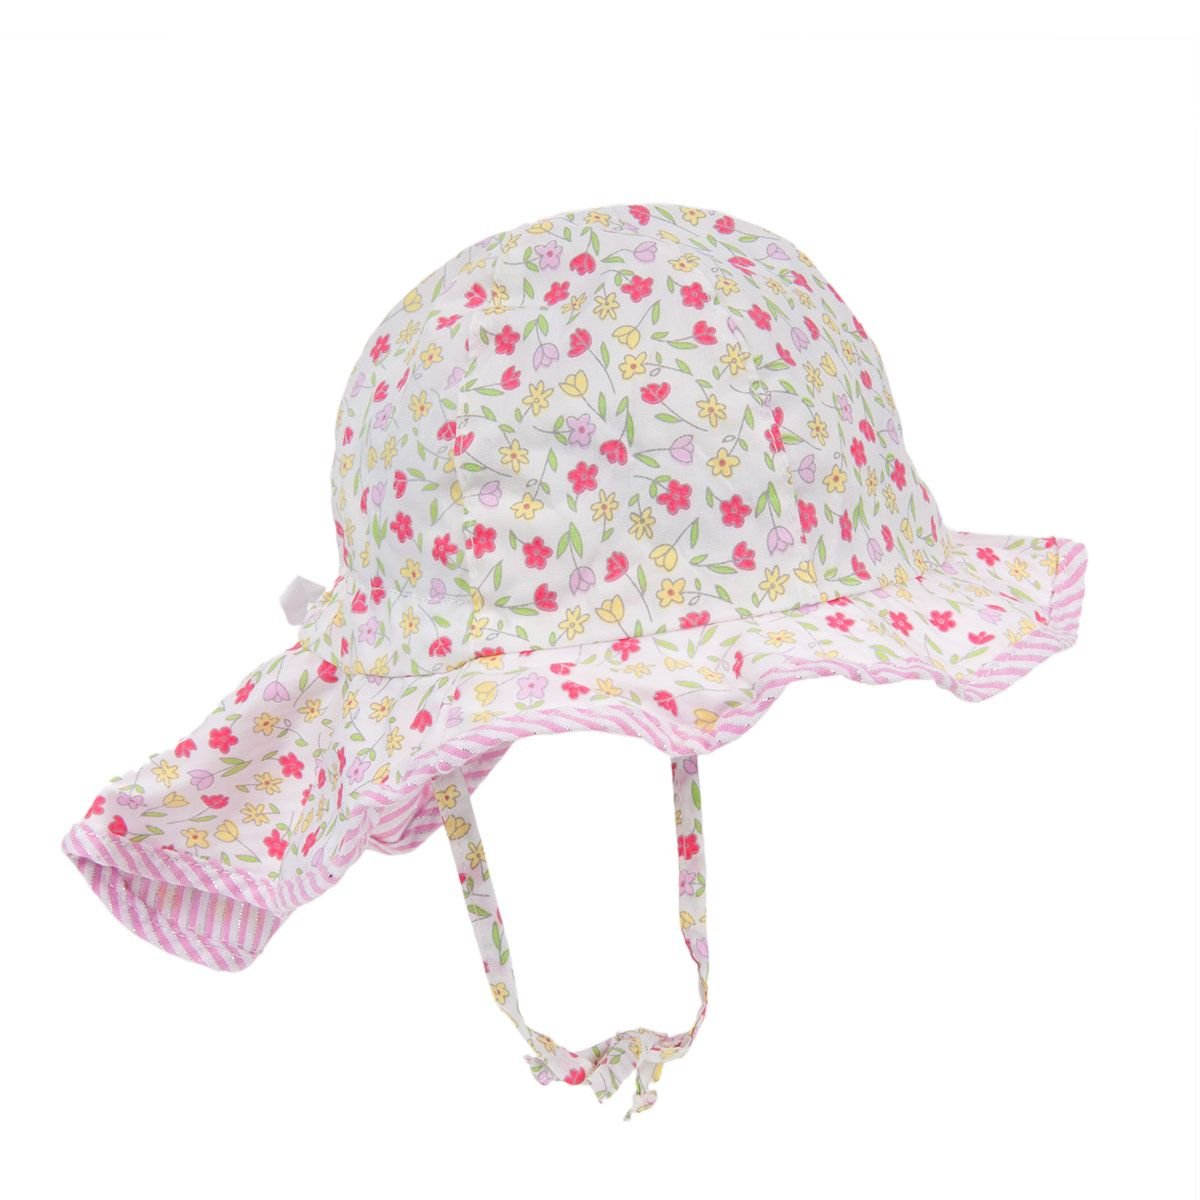 White Sterntaler Girls Sun Hat with Ties and Neck Protection Age: 12-18 months Size: 49